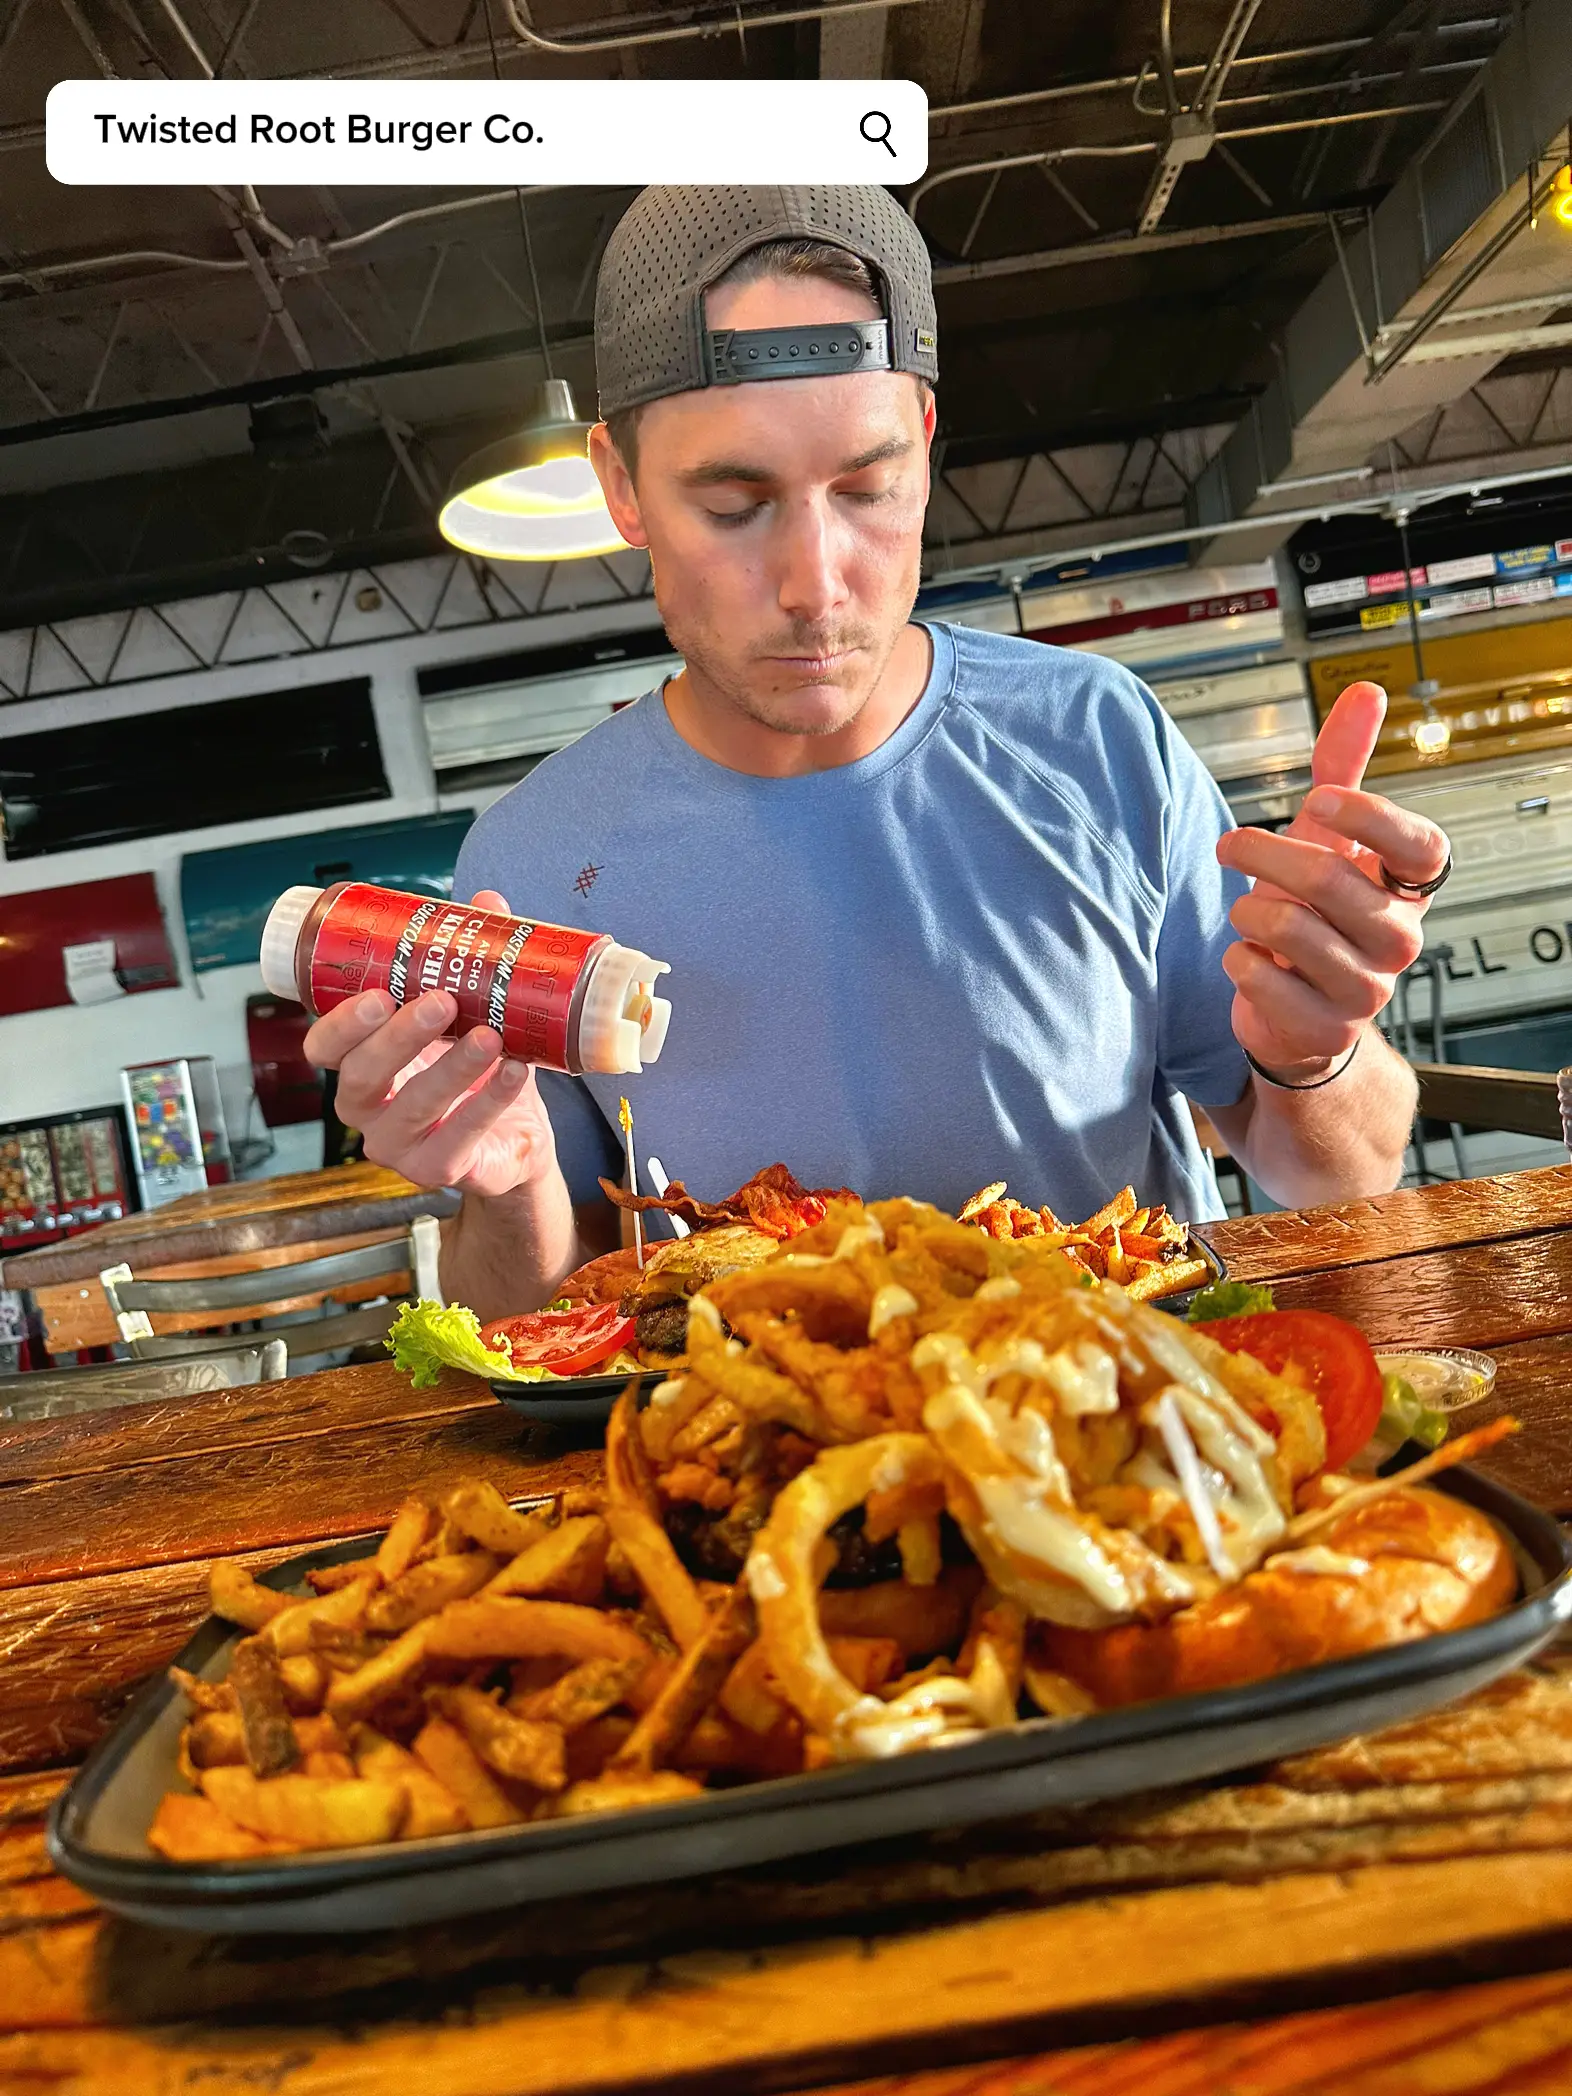  A man is holding a plate with a cheesy fries and a burger.